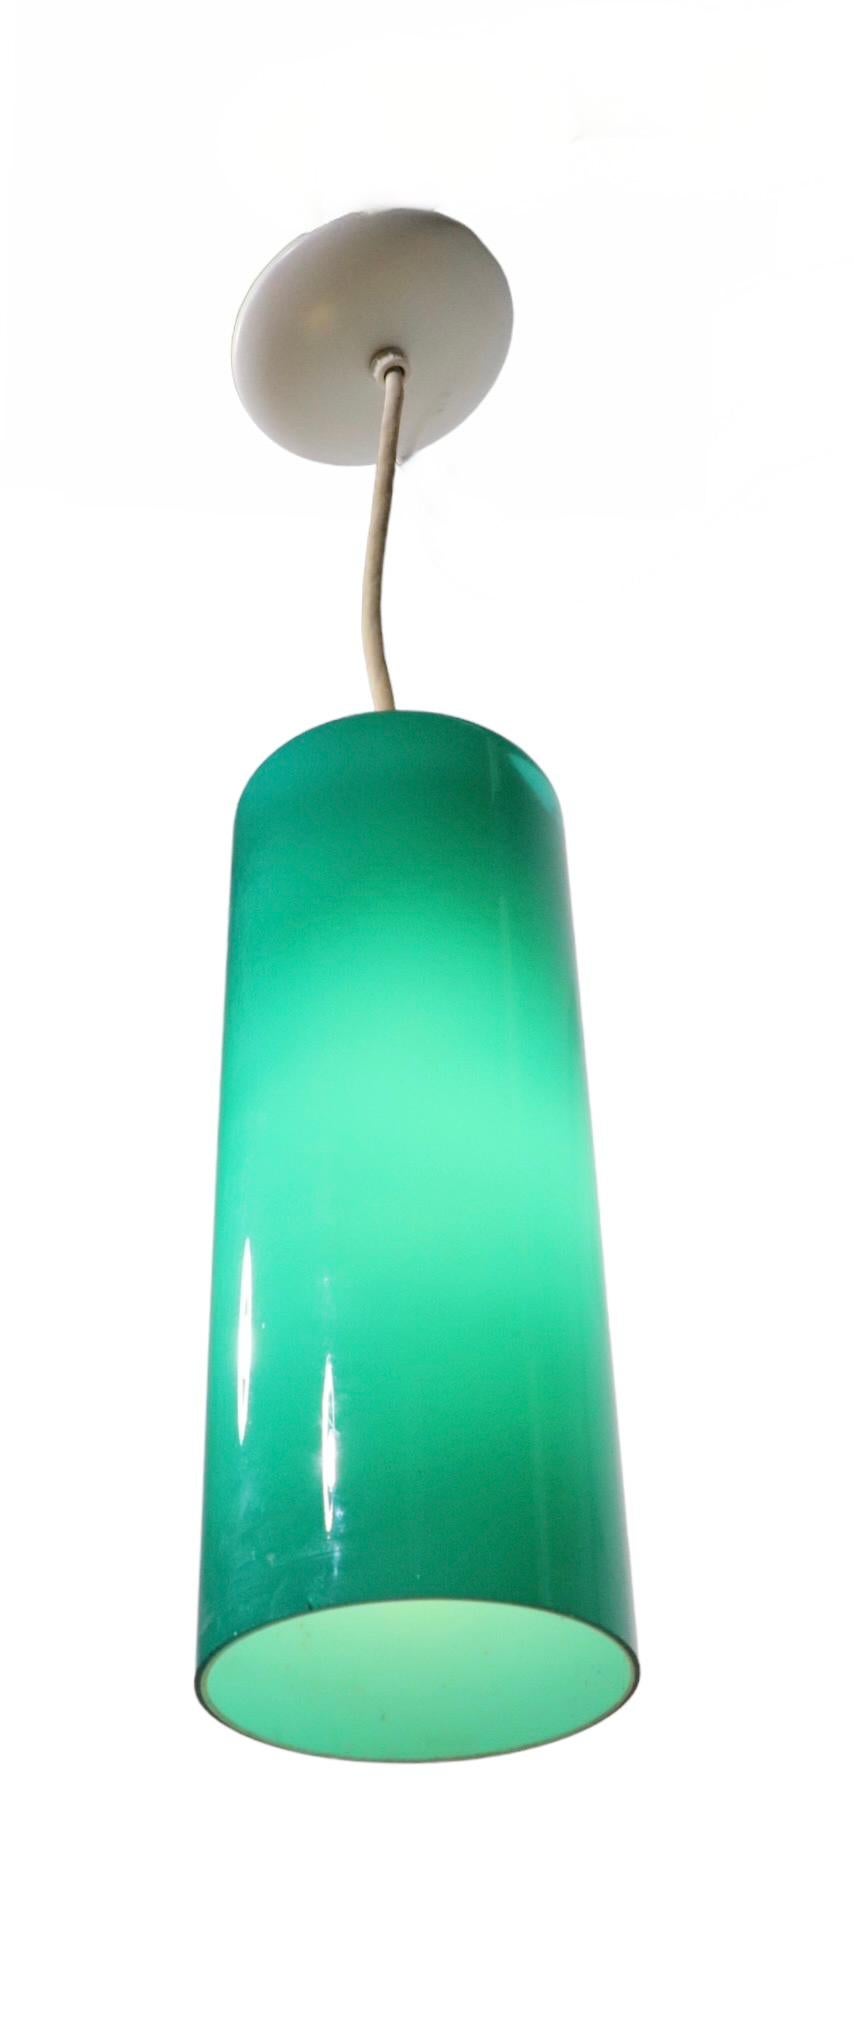 Prescolite Cylinder Pendant Chandelier in Green Glass, C 1950 - 1970's For Sale 5